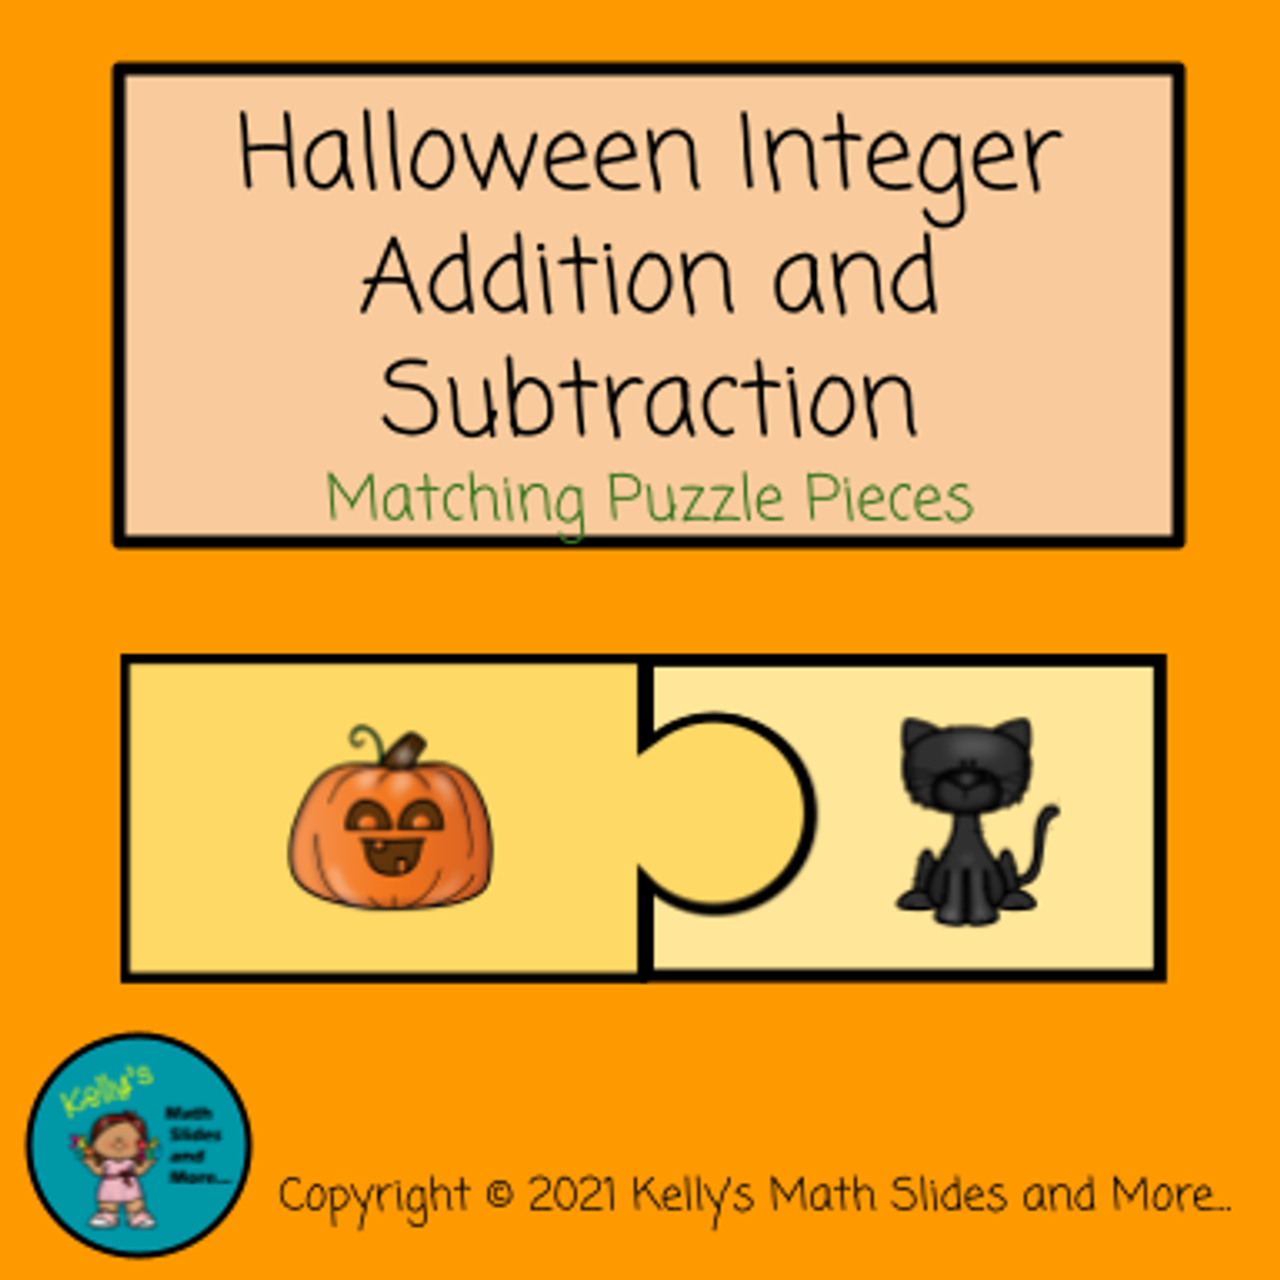 Halloween Integer Addition and Subtraction Matching Puzzle